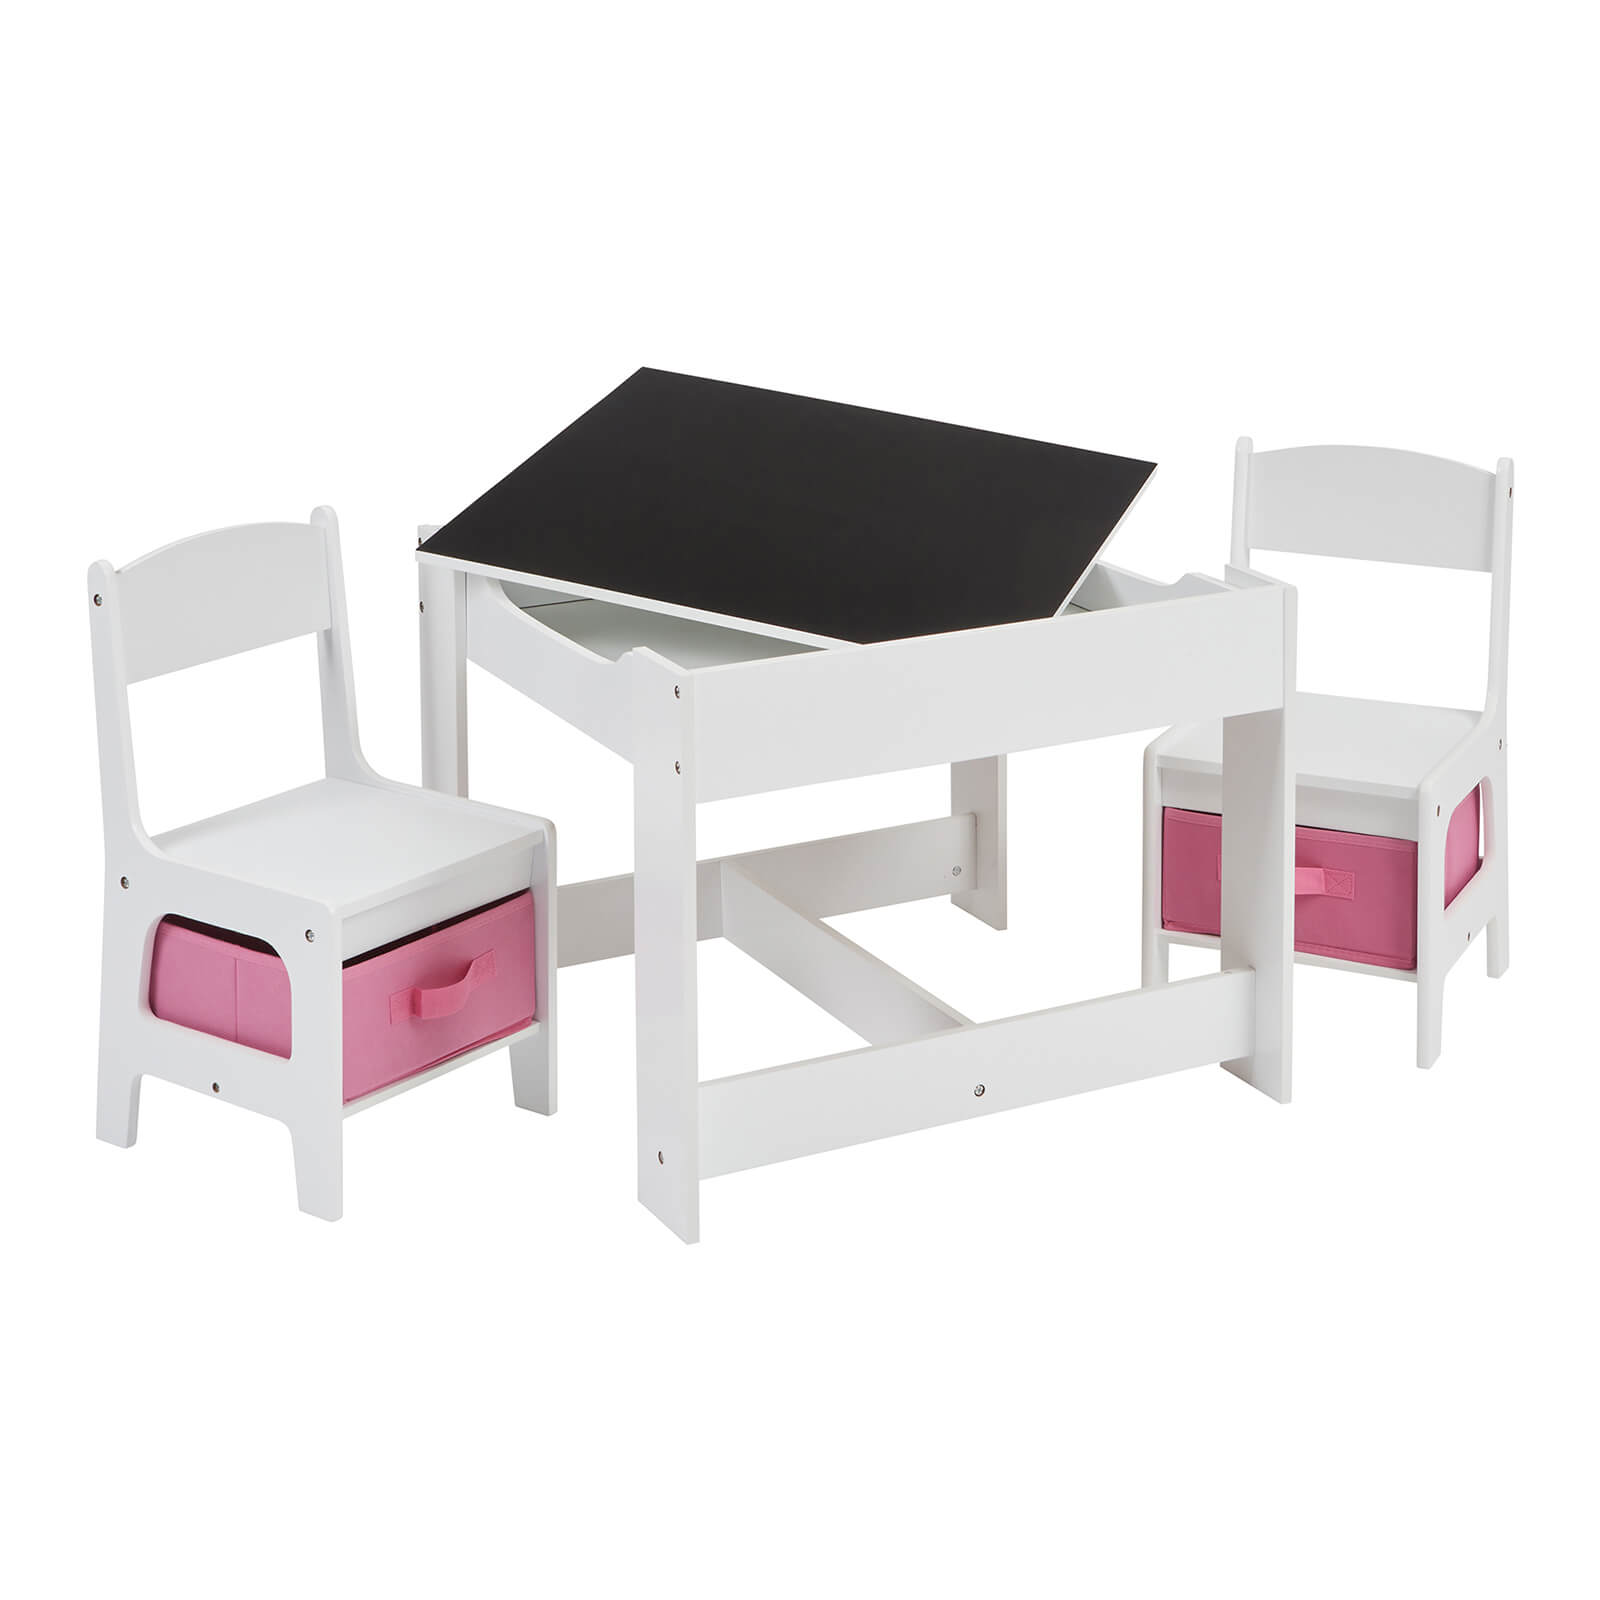 Photo of Table & Chair - White With Pink Bins